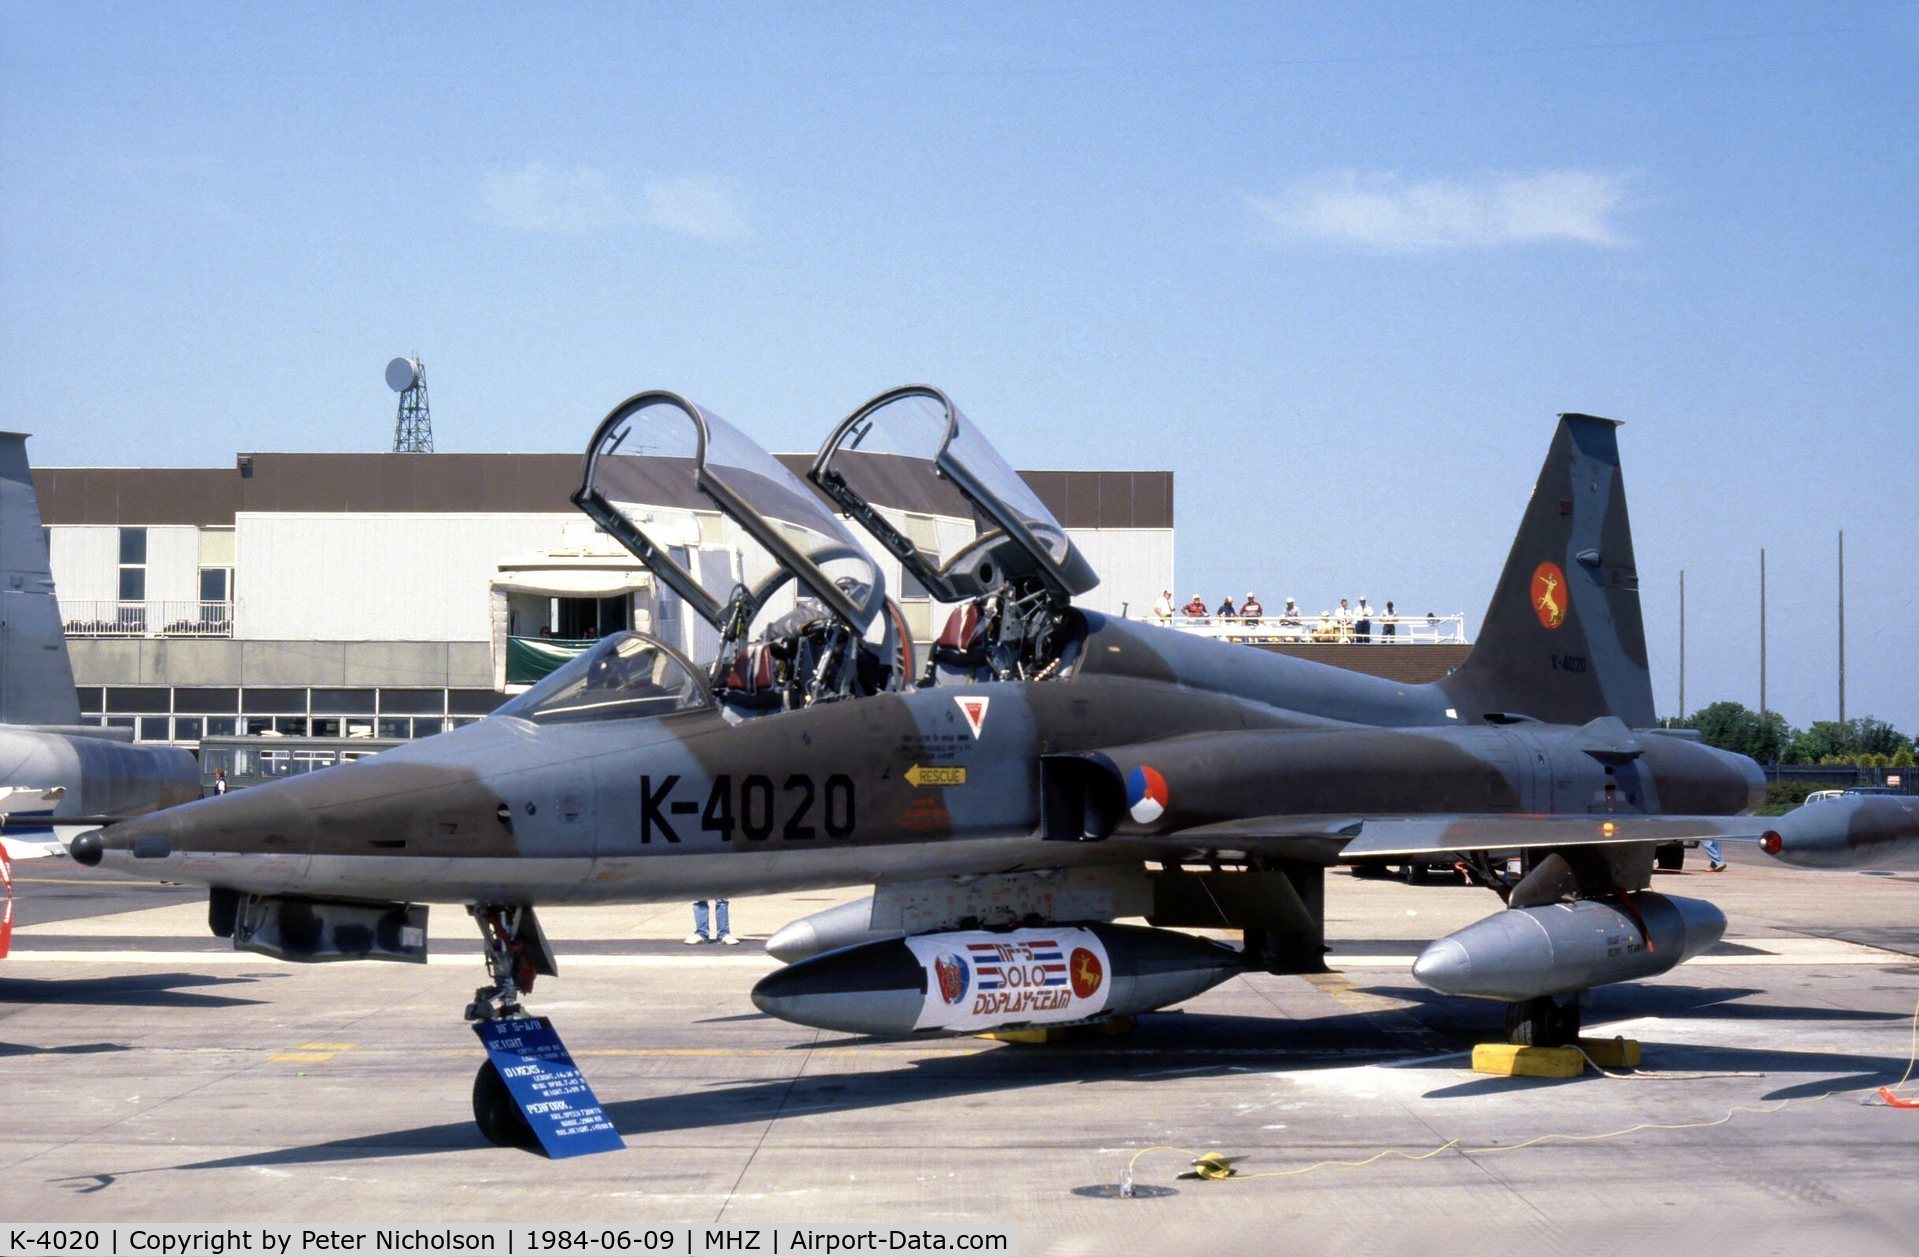 K-4020, 1971 Canadair NF-5B Freedom Fighter C/N 4020, Royal Netherlands Air Force NF-5B of 314 Squadron at the 1984 RAF Mildenhall Air Fete.